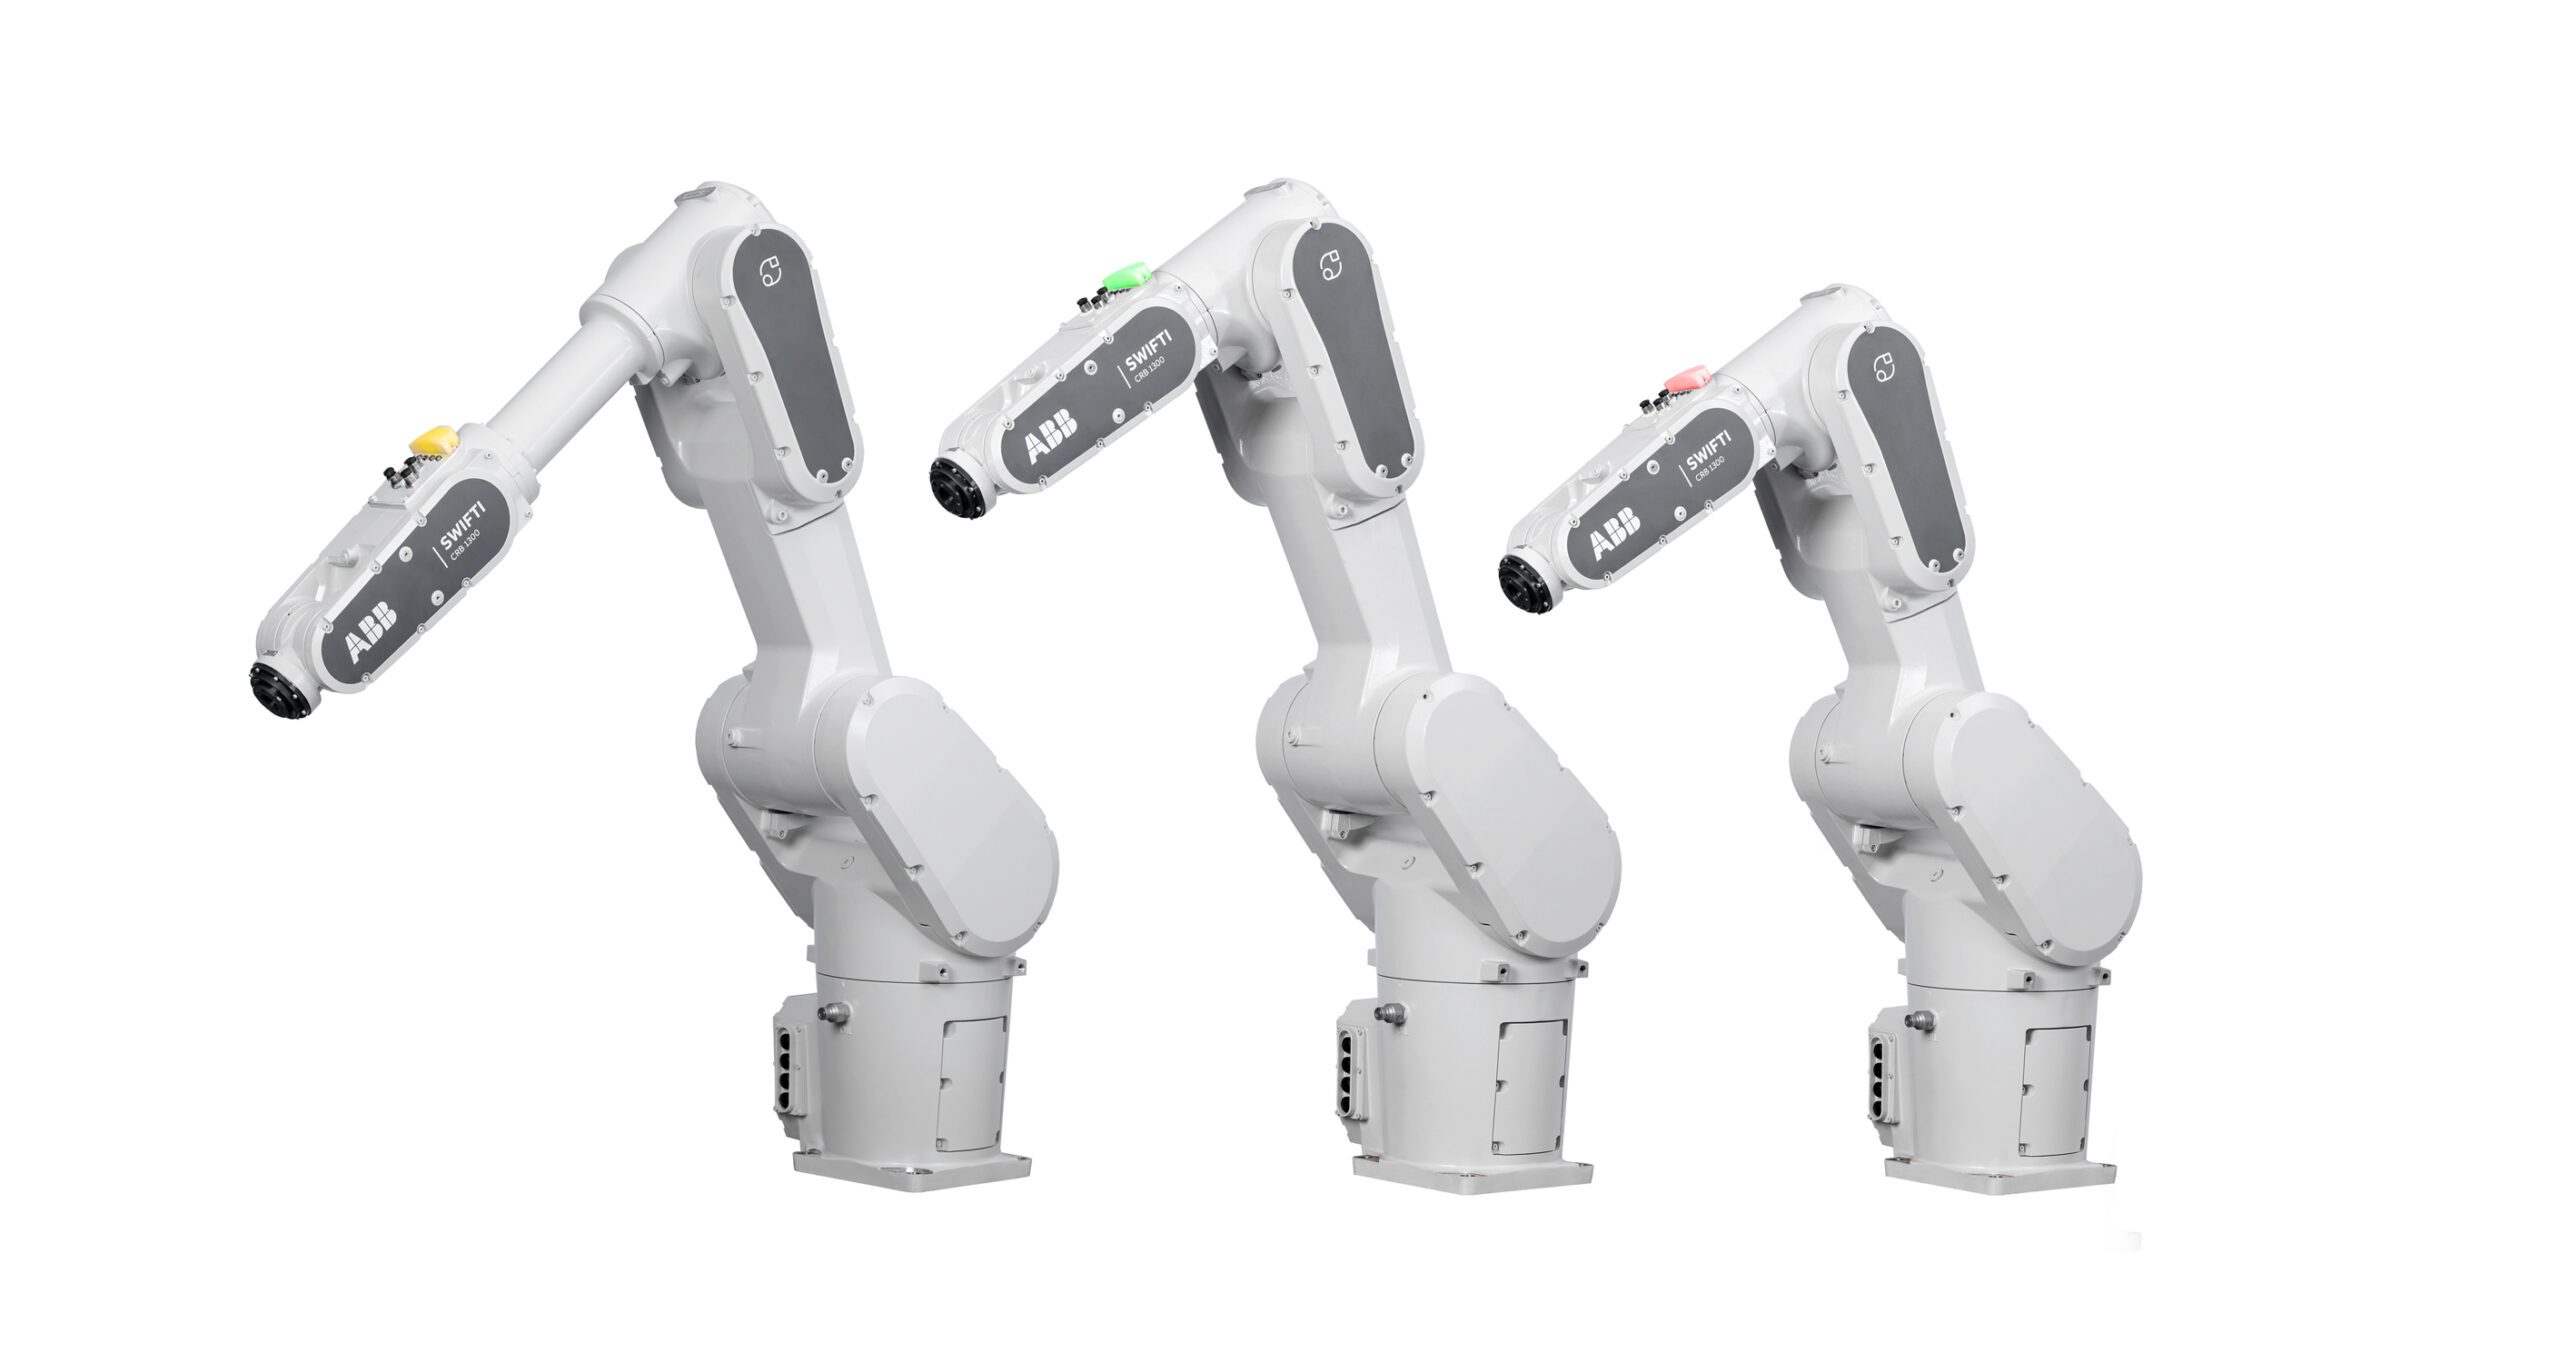 New Industrial Cobot Delivers Class-Leading Speed, Accuracy and Safety